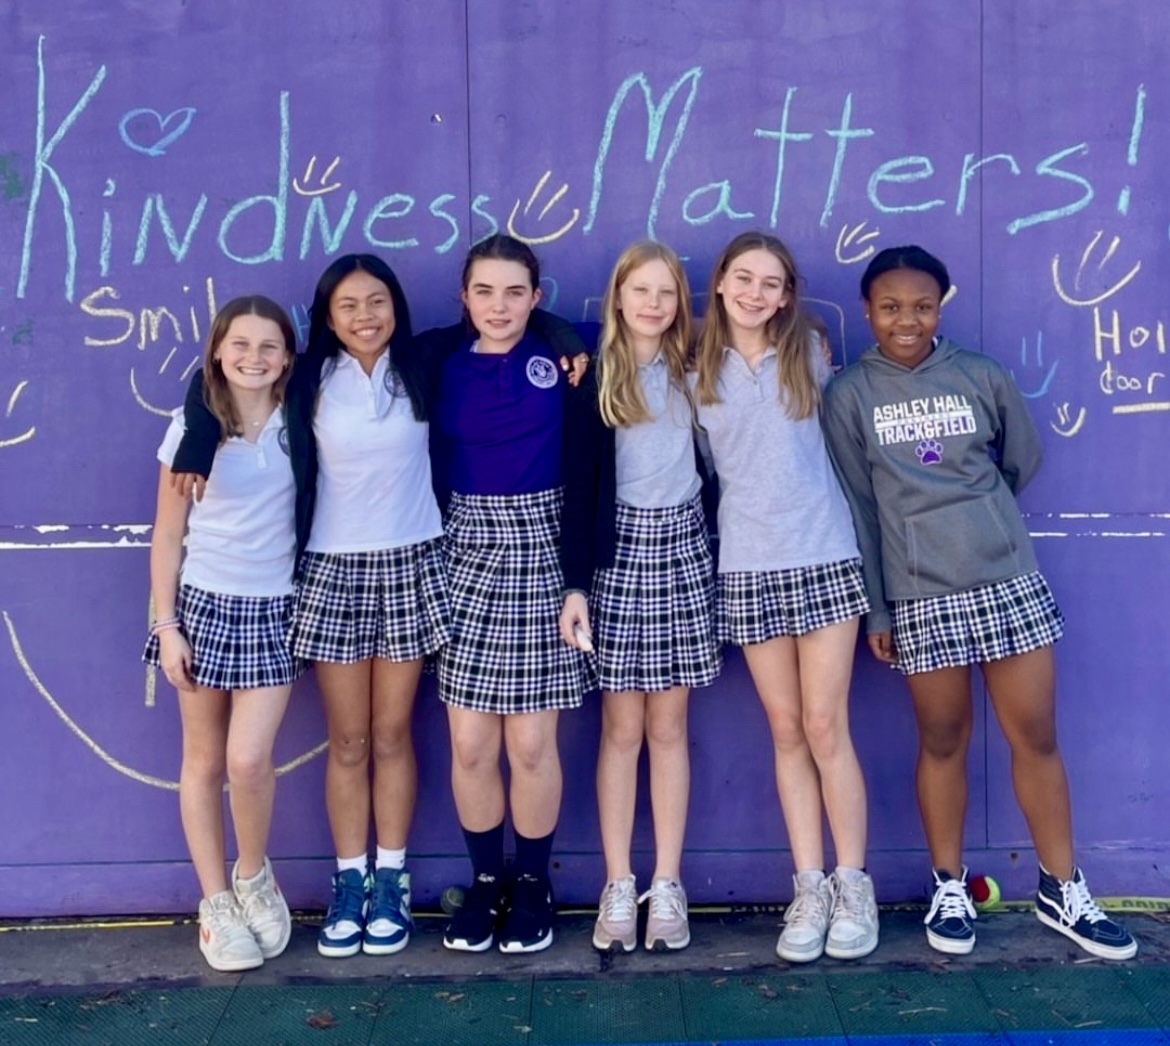 'When we seek to discover the best in others, we somehow bring out the best in ourselves.' —William Arthur Ward Thank you #AshleyHall for this great photo taken during The Great Kindness Challenge. ❤️ #KidsforPeace #GreatKindnessChallenge #kindnessmattersmonday #kindnessmatters